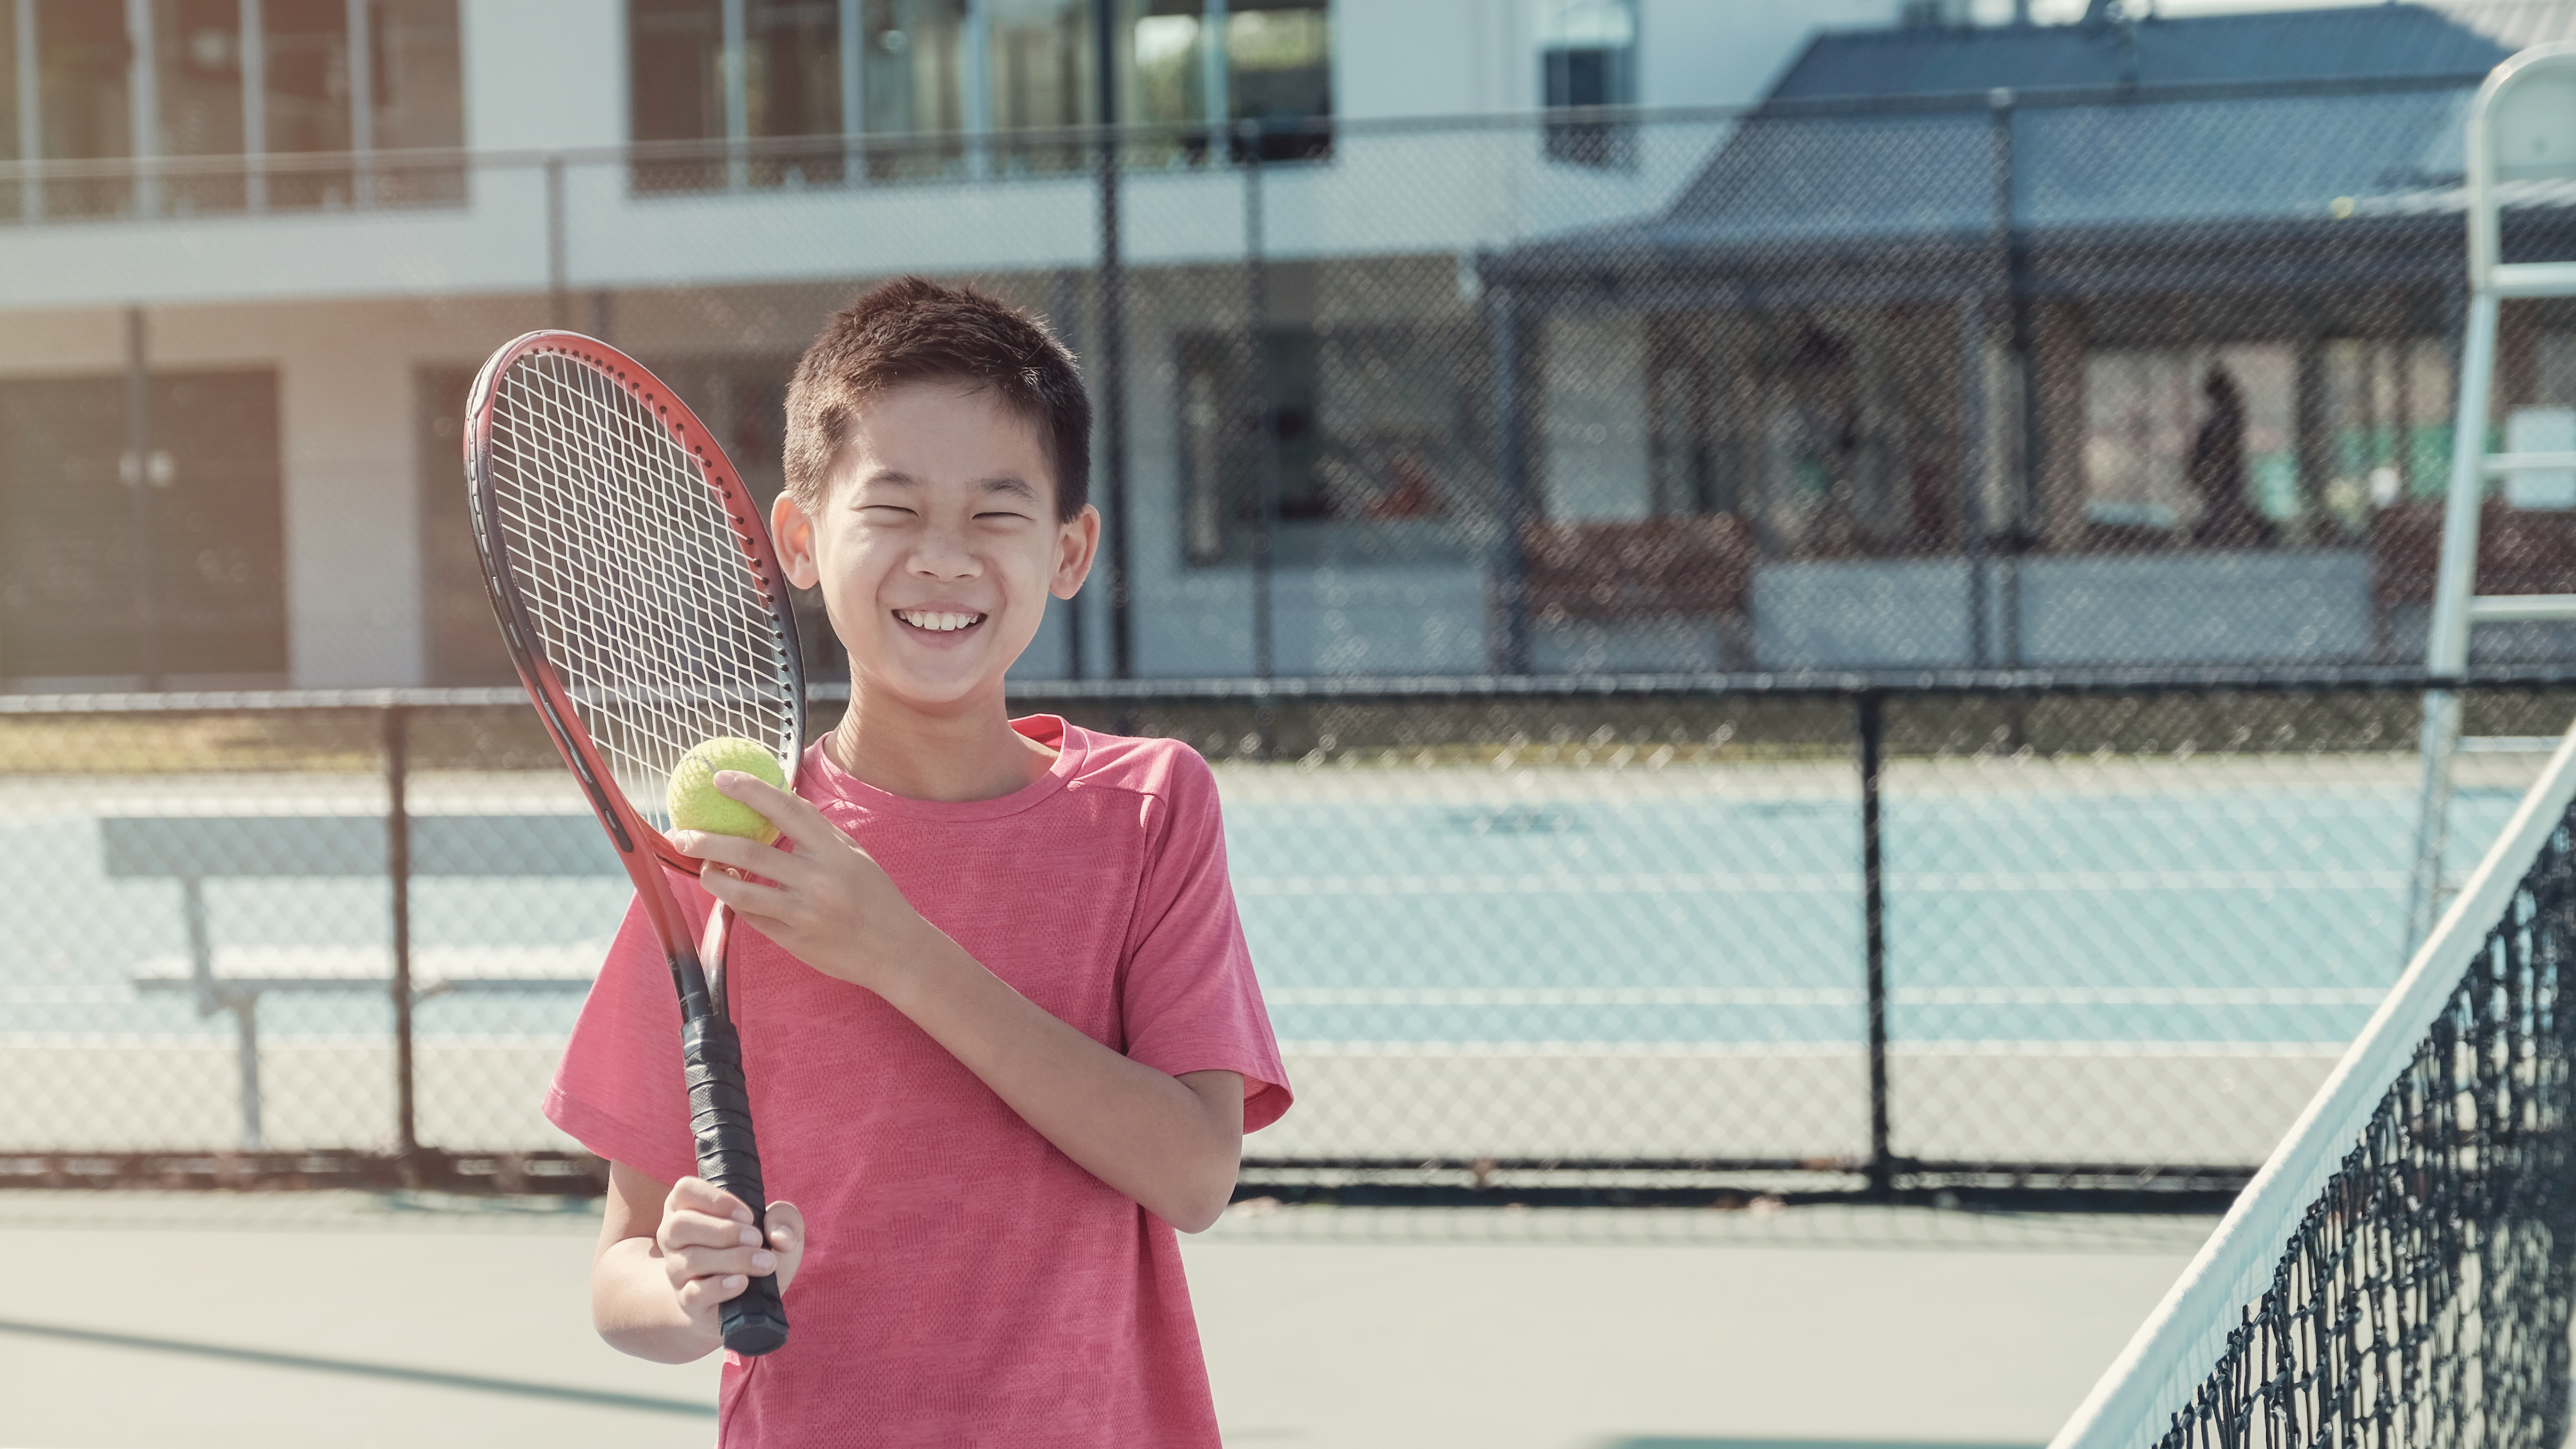 a boy stands on a tennis court with a racket and ball